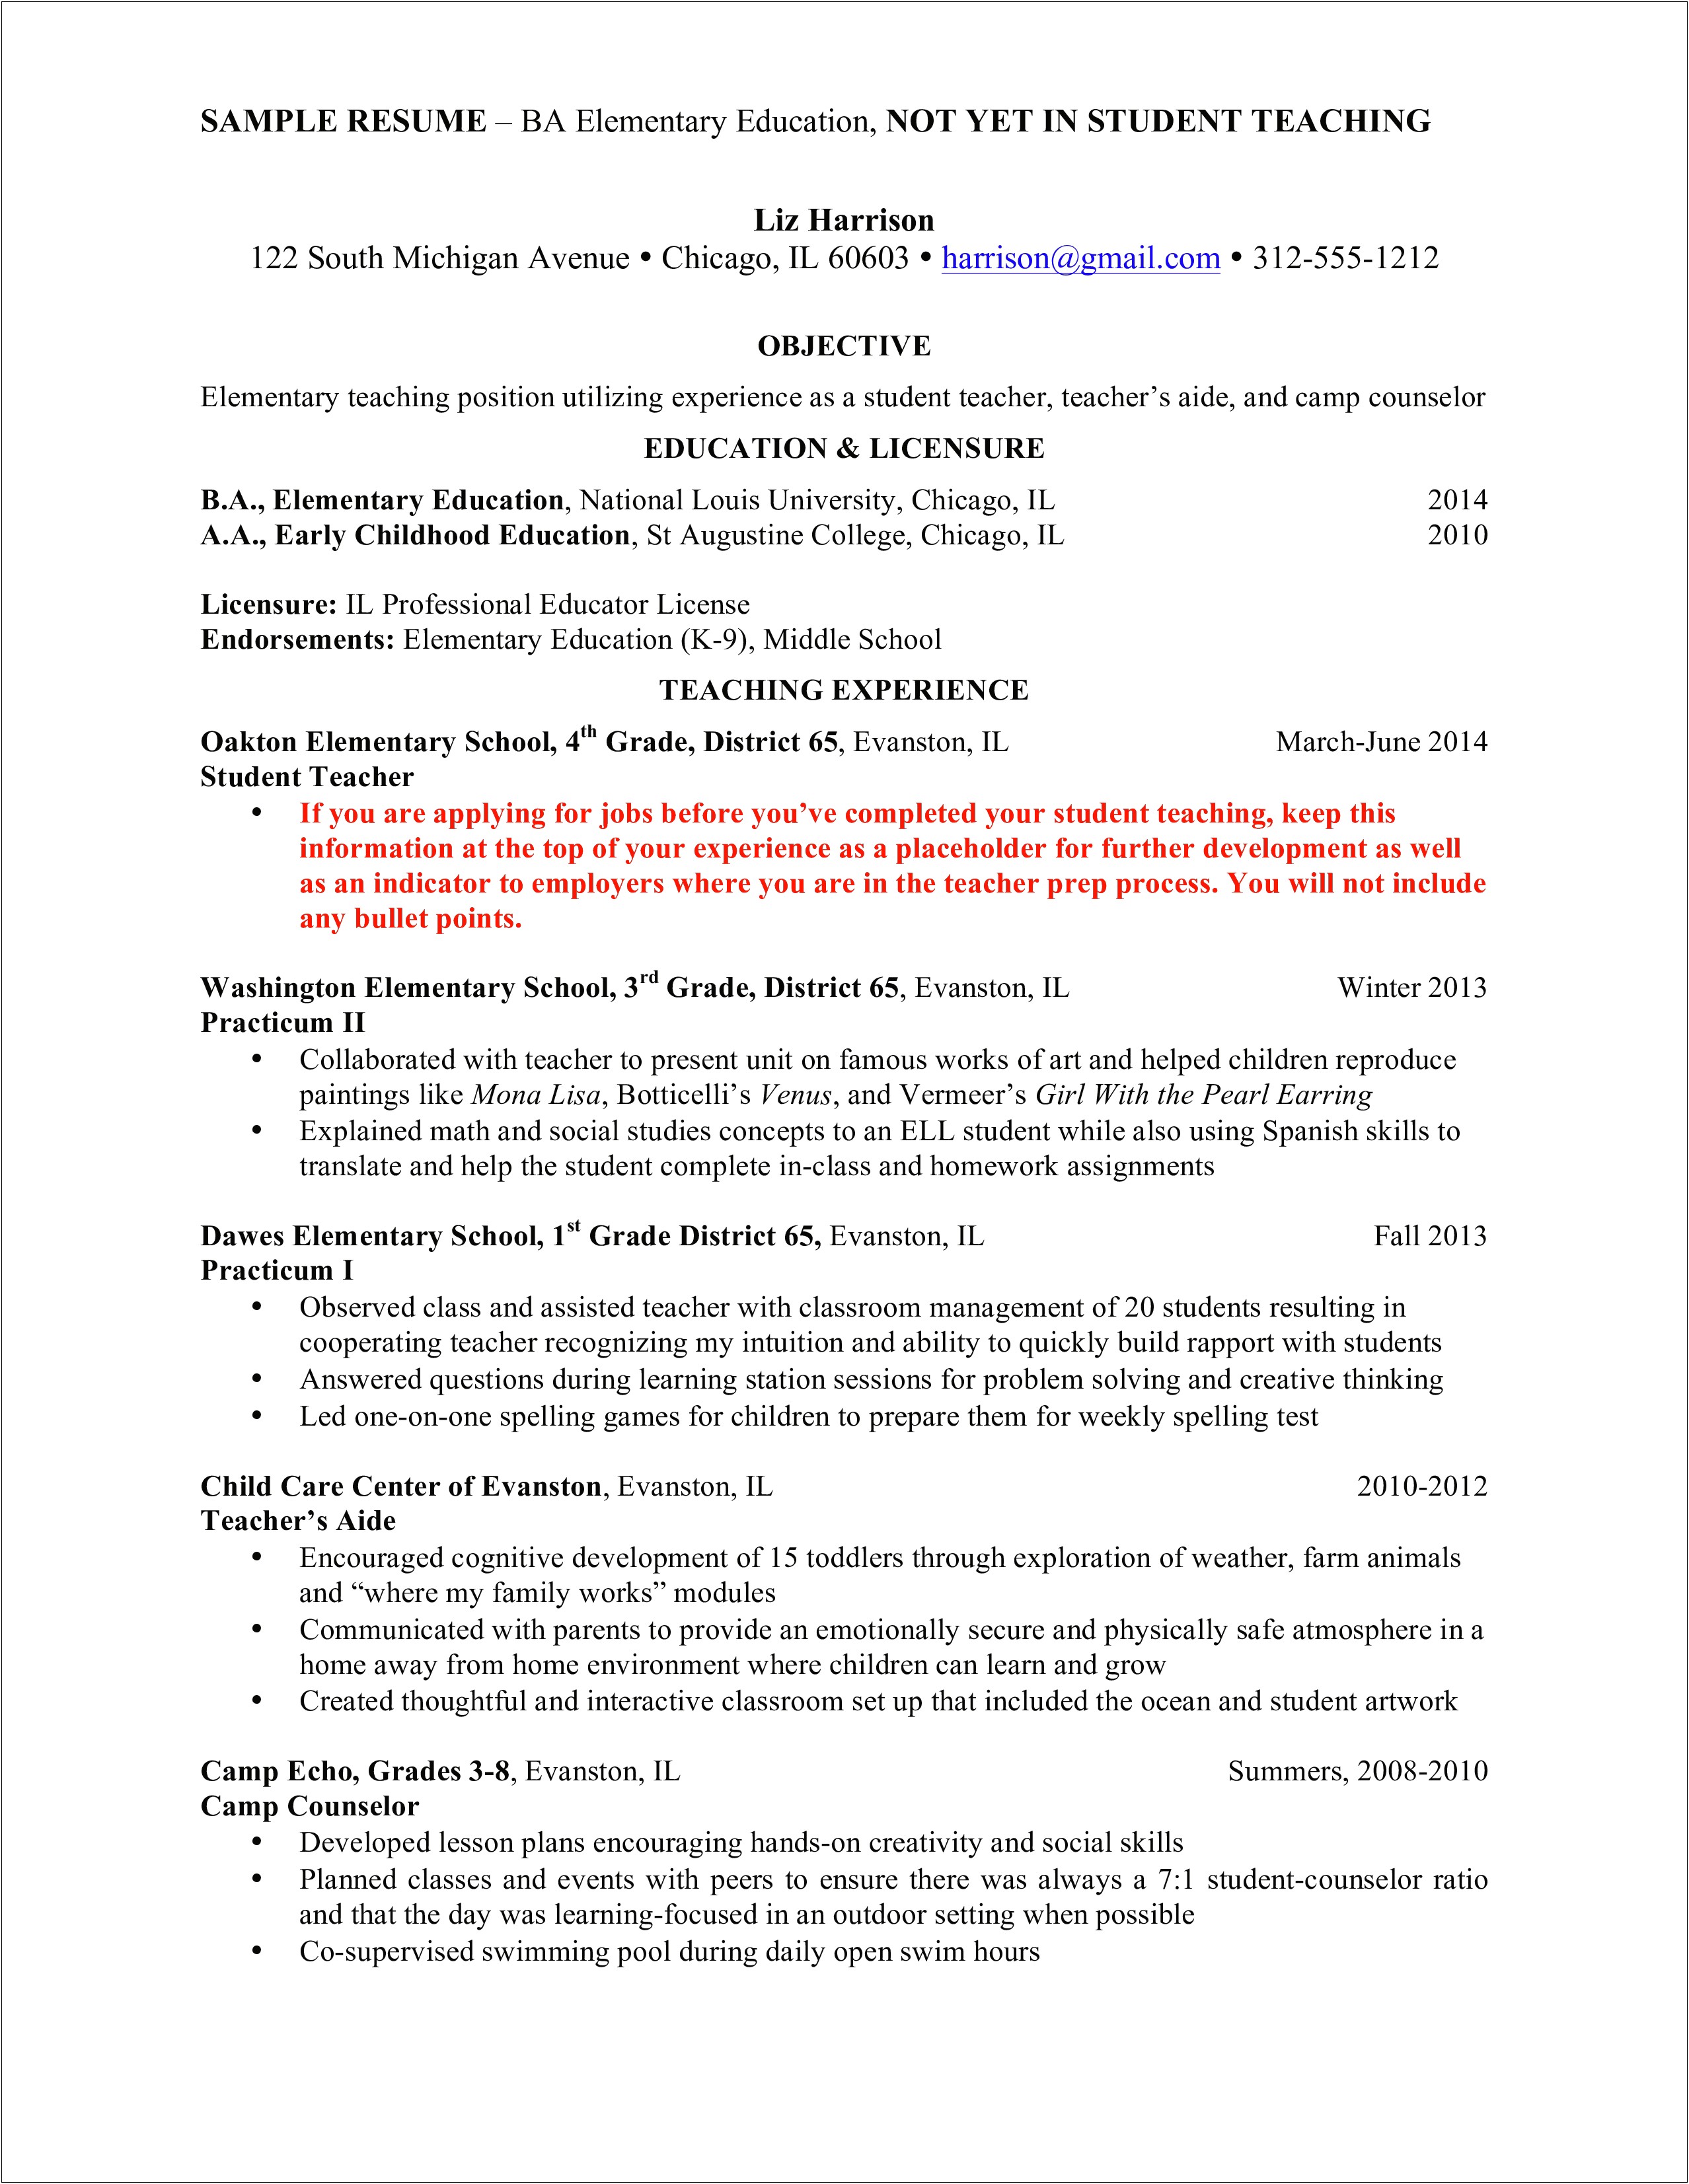 Teacher Resume With Student Teaching Experience